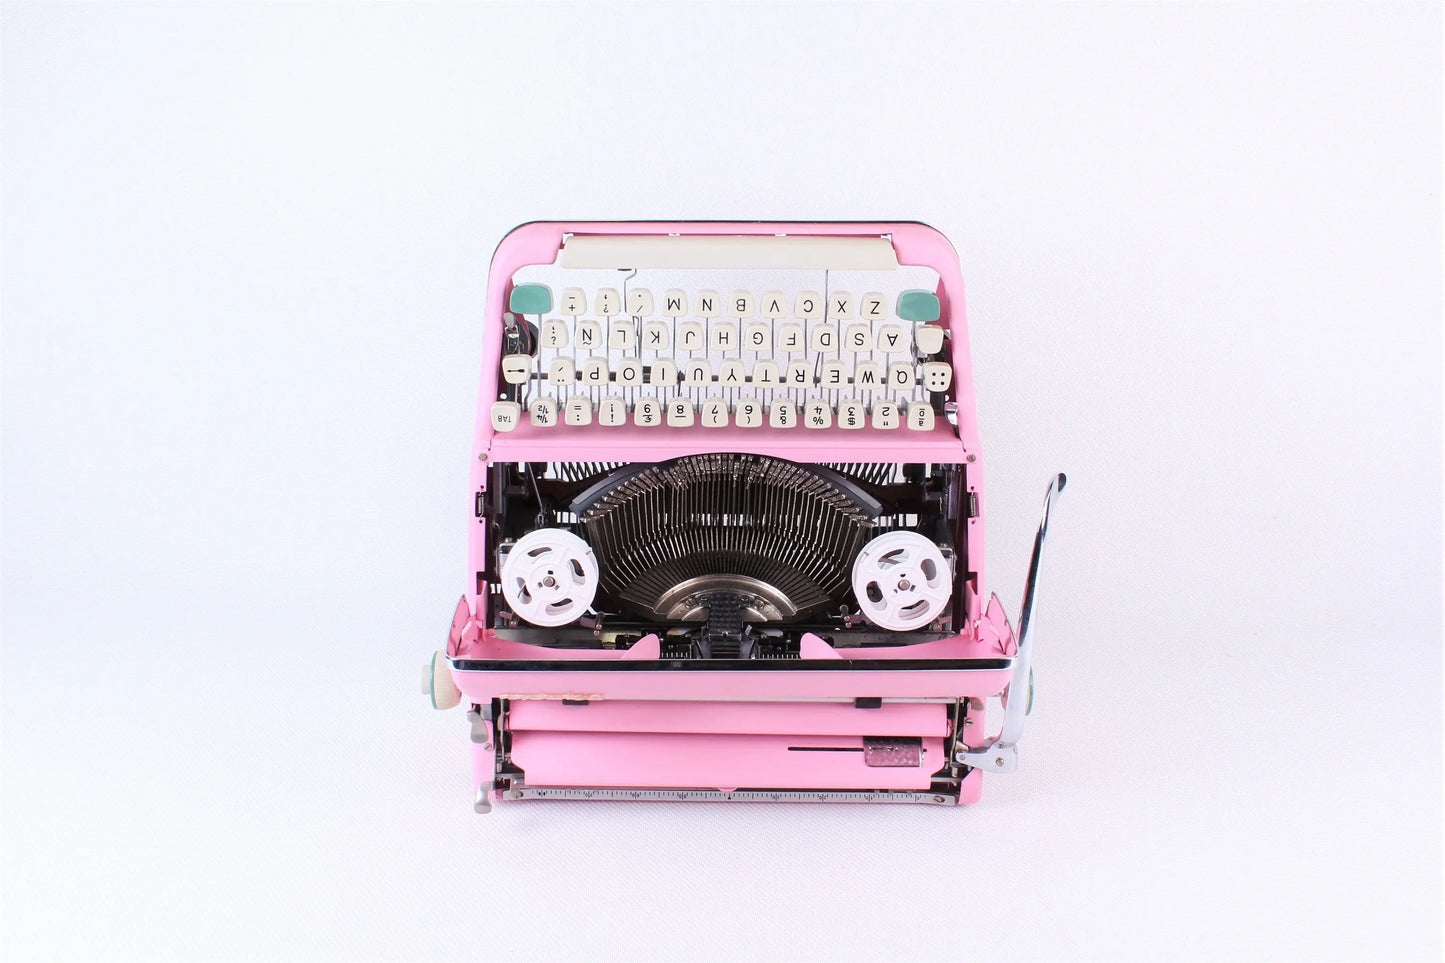 SALE! - Olympia SM2/3 Pink Typewriter, Vintage, Mint Condition, Professionally Serviced - ElGranero Typewriter.Company